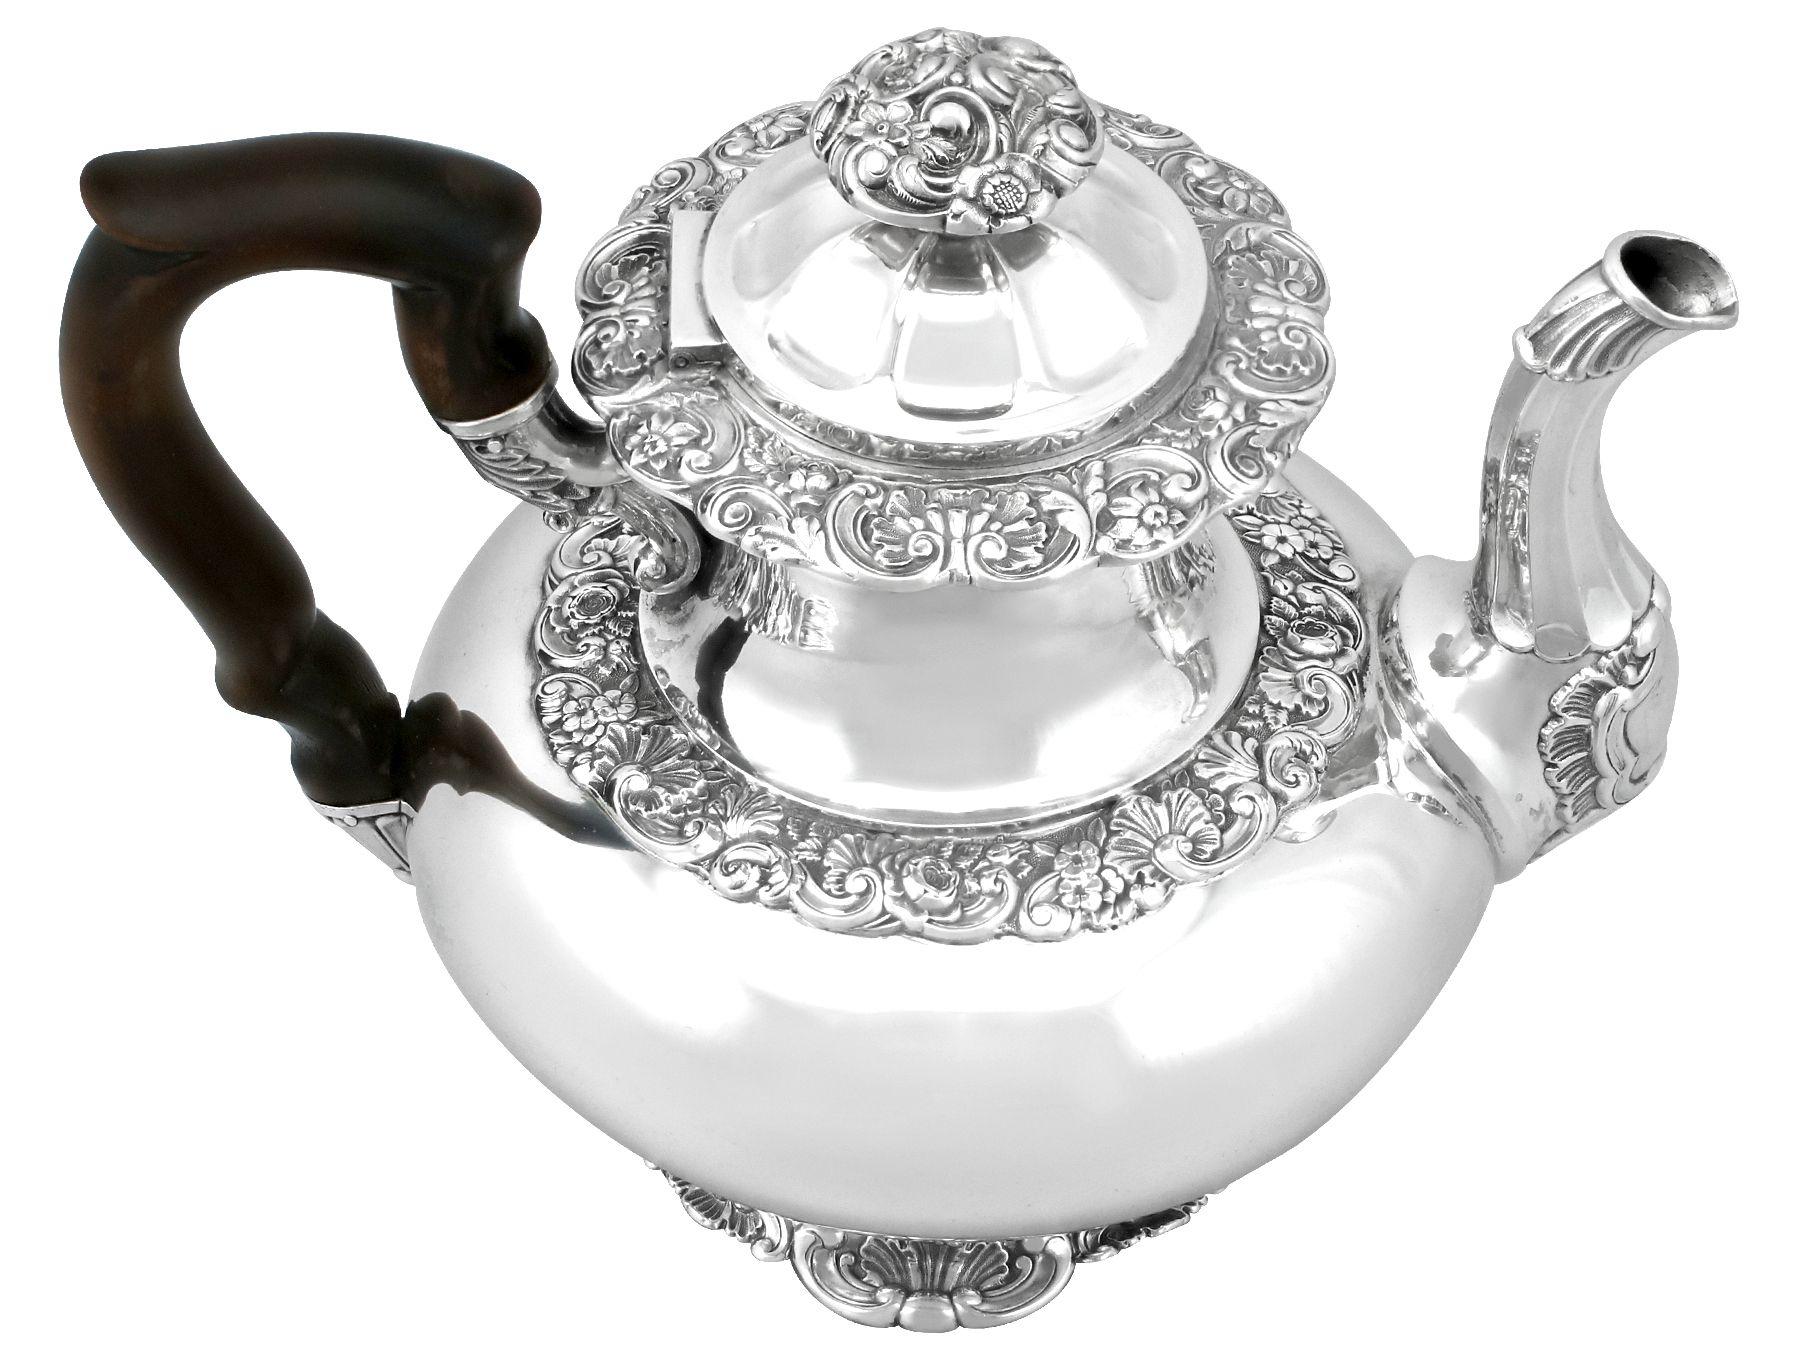 A fine and impressive antique German silver coffee pot; an addition to our silver teaware collection

This impressive antique German silver coffee pot has an bulbous shaped form onto a circular shaped spreading foot.

The surface of this coffee pot